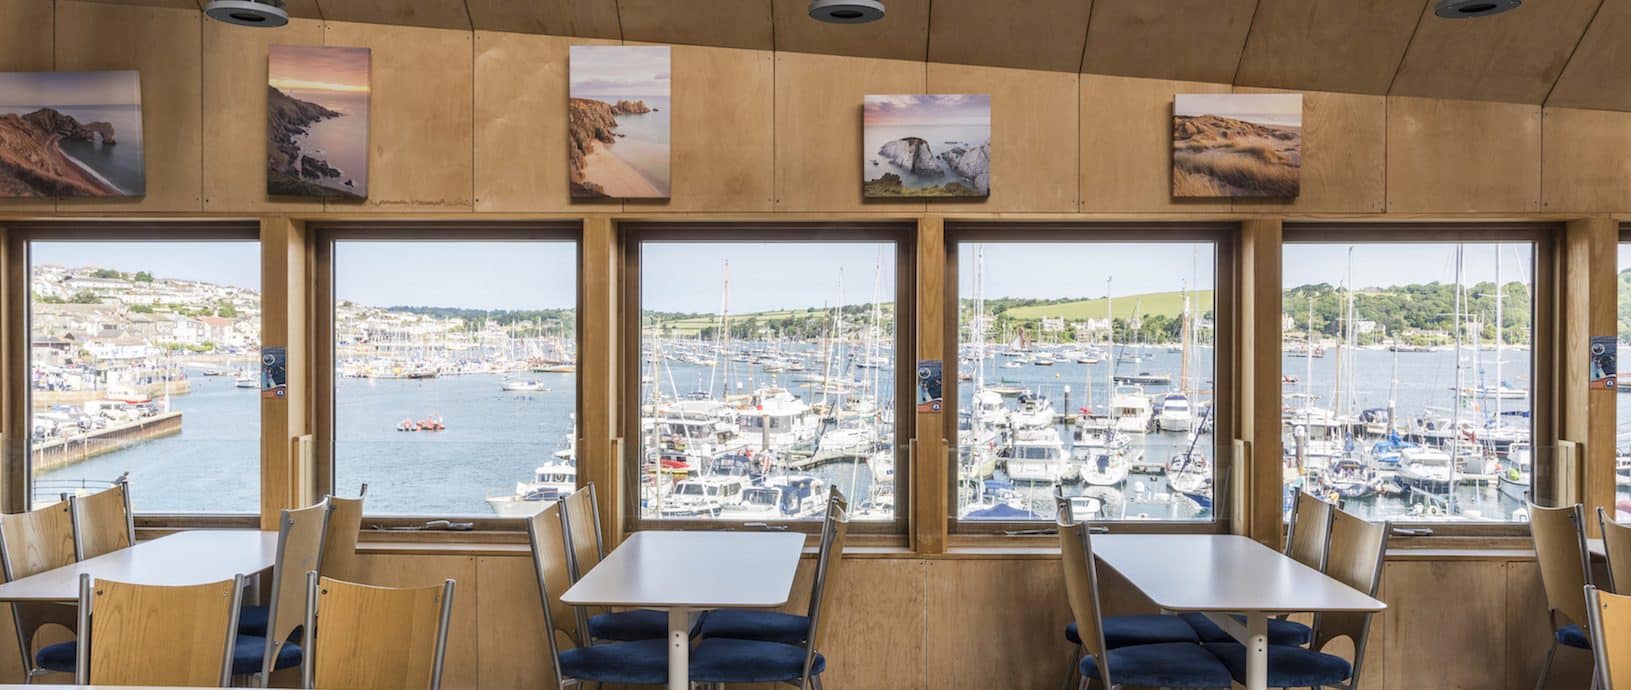 A photo of the Waterside Cafe at the Museum, with the windows overlooking Falmouth Marina and the harbour.